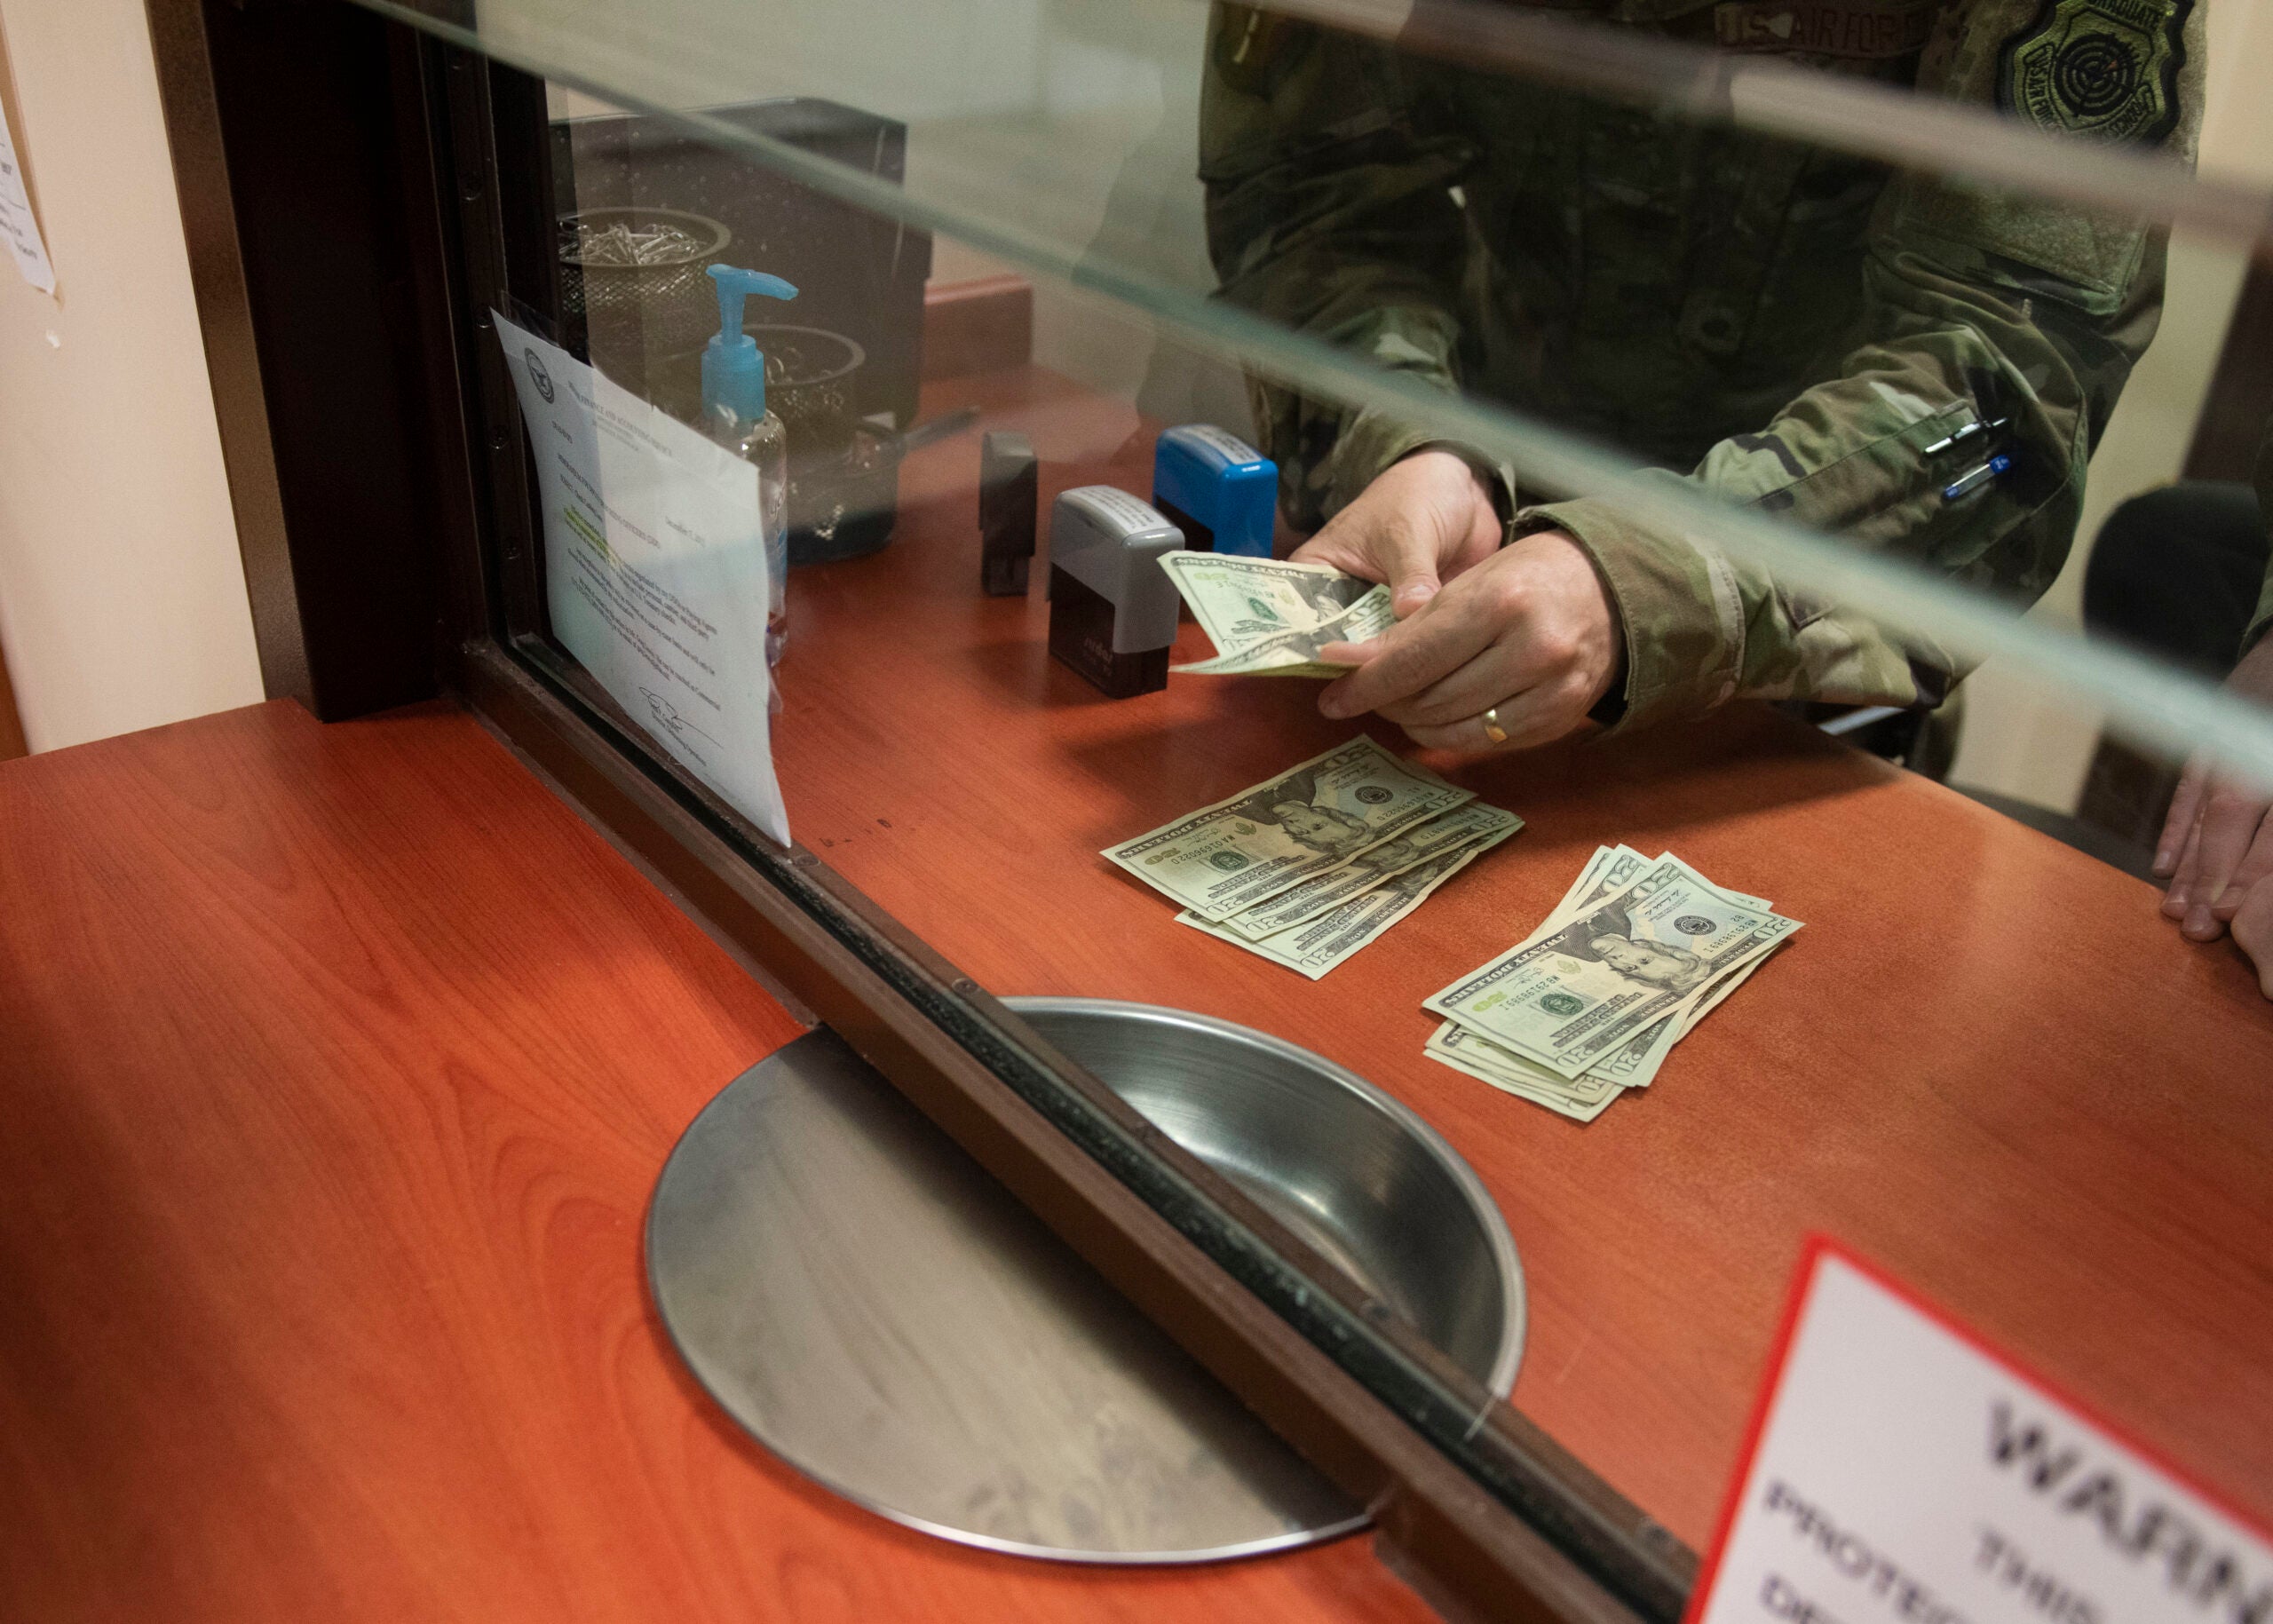 U.S. Air Force Col. John Creel, 39th Air Base Wing commander, counts cash for a customer’s withdrawal request as part of his immersion tour with the wing staff agency July 30, 2020, at Incirlik Air Base, Turkey. The 39th CPTS finance customer service team provides financial assistance for over 2,500 members at Incirlik Air Base. (U.S. Air Force photo by Senior Airman Matthew Angulo)